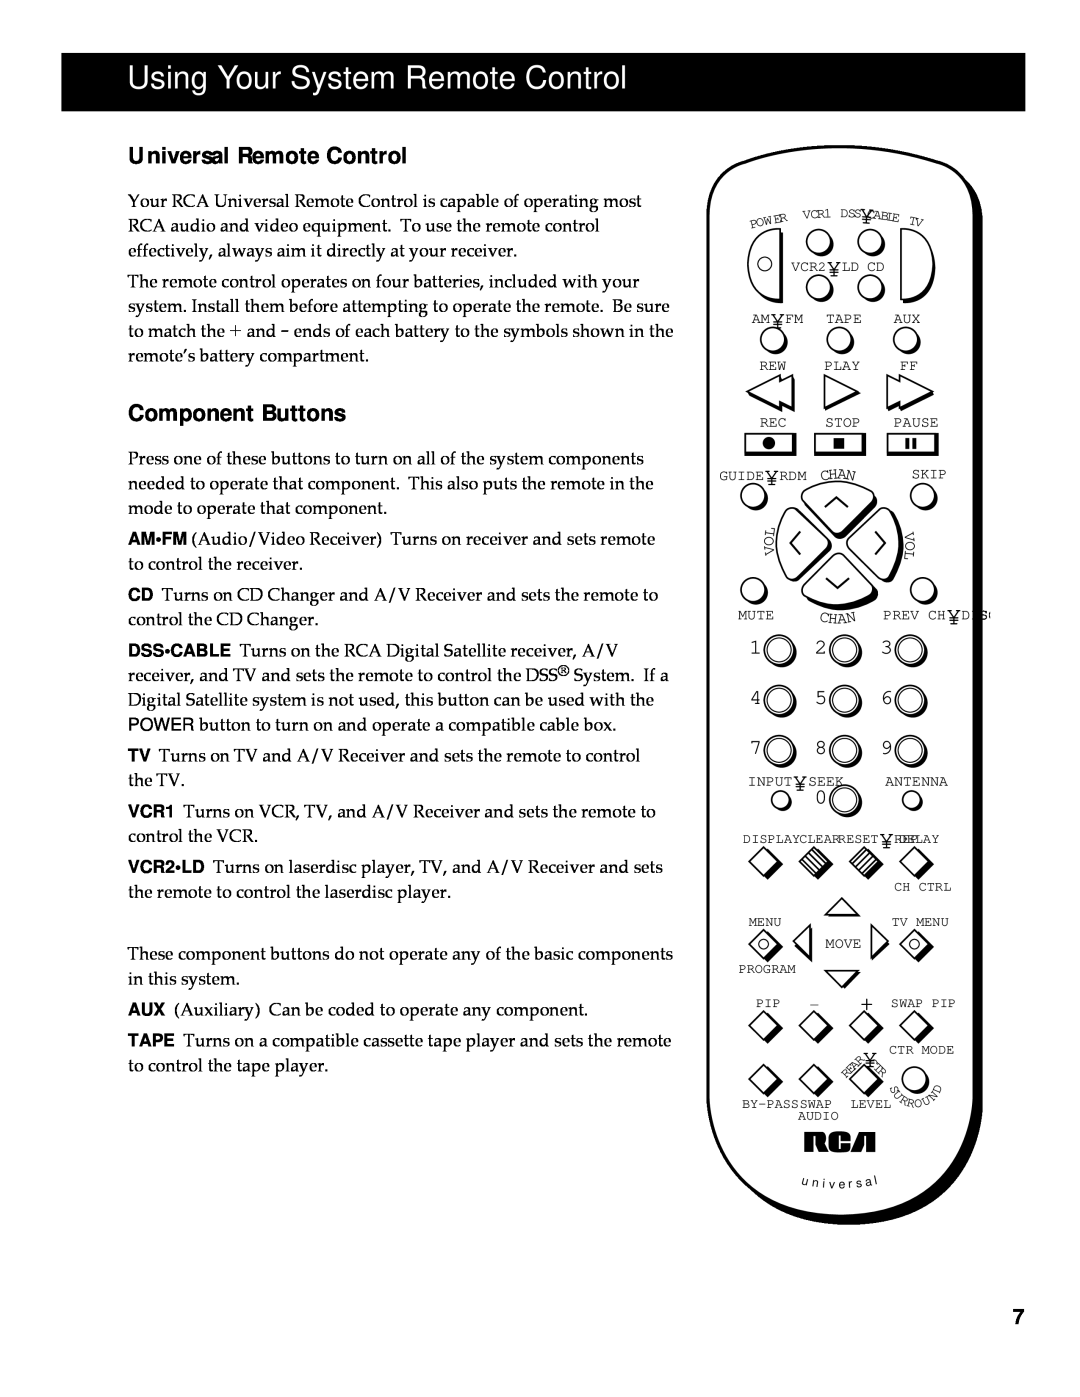 RCA HT35713BD, HT60903BD, 253 Series Universal Remote Control, Component Buttons, Using Your System Remote Control, 123 